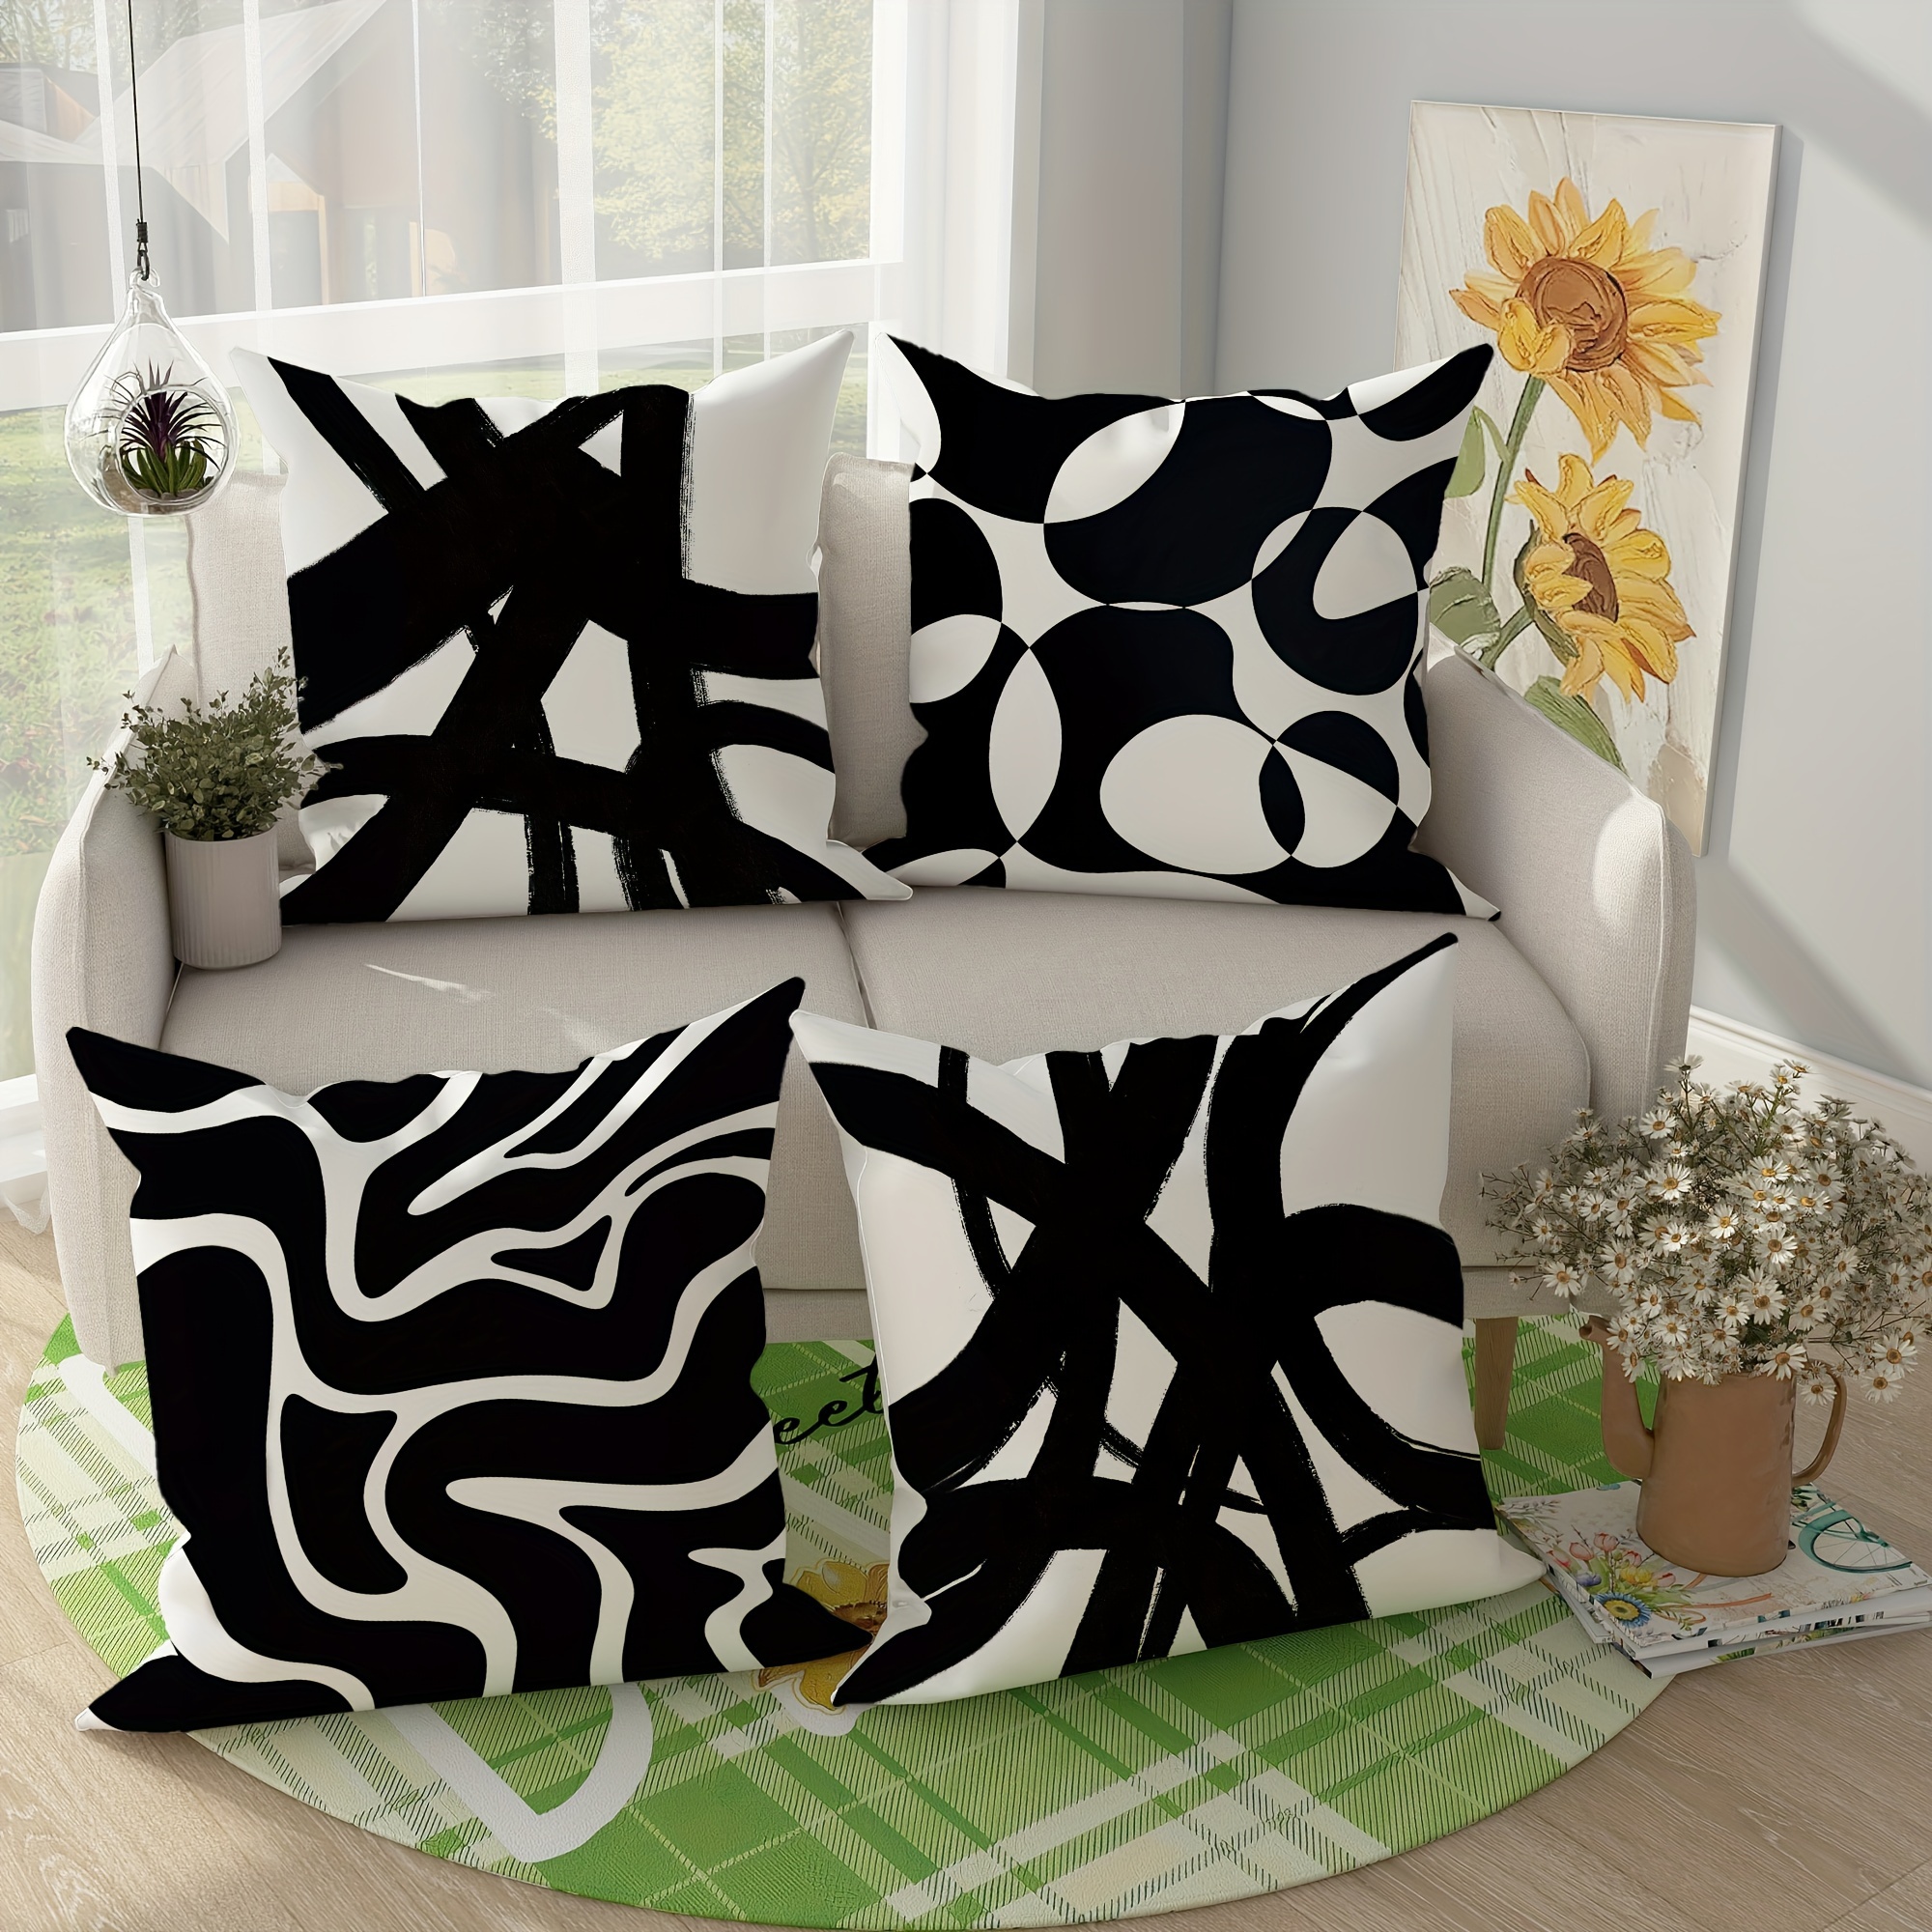 

4-pack Velvet Throw Pillow Covers, Abstract Geometric Black And White, Contemporary Style, Machine Washable, Zipper Closure, For Living Room Sofa Bed Decor - Polyester, Woven